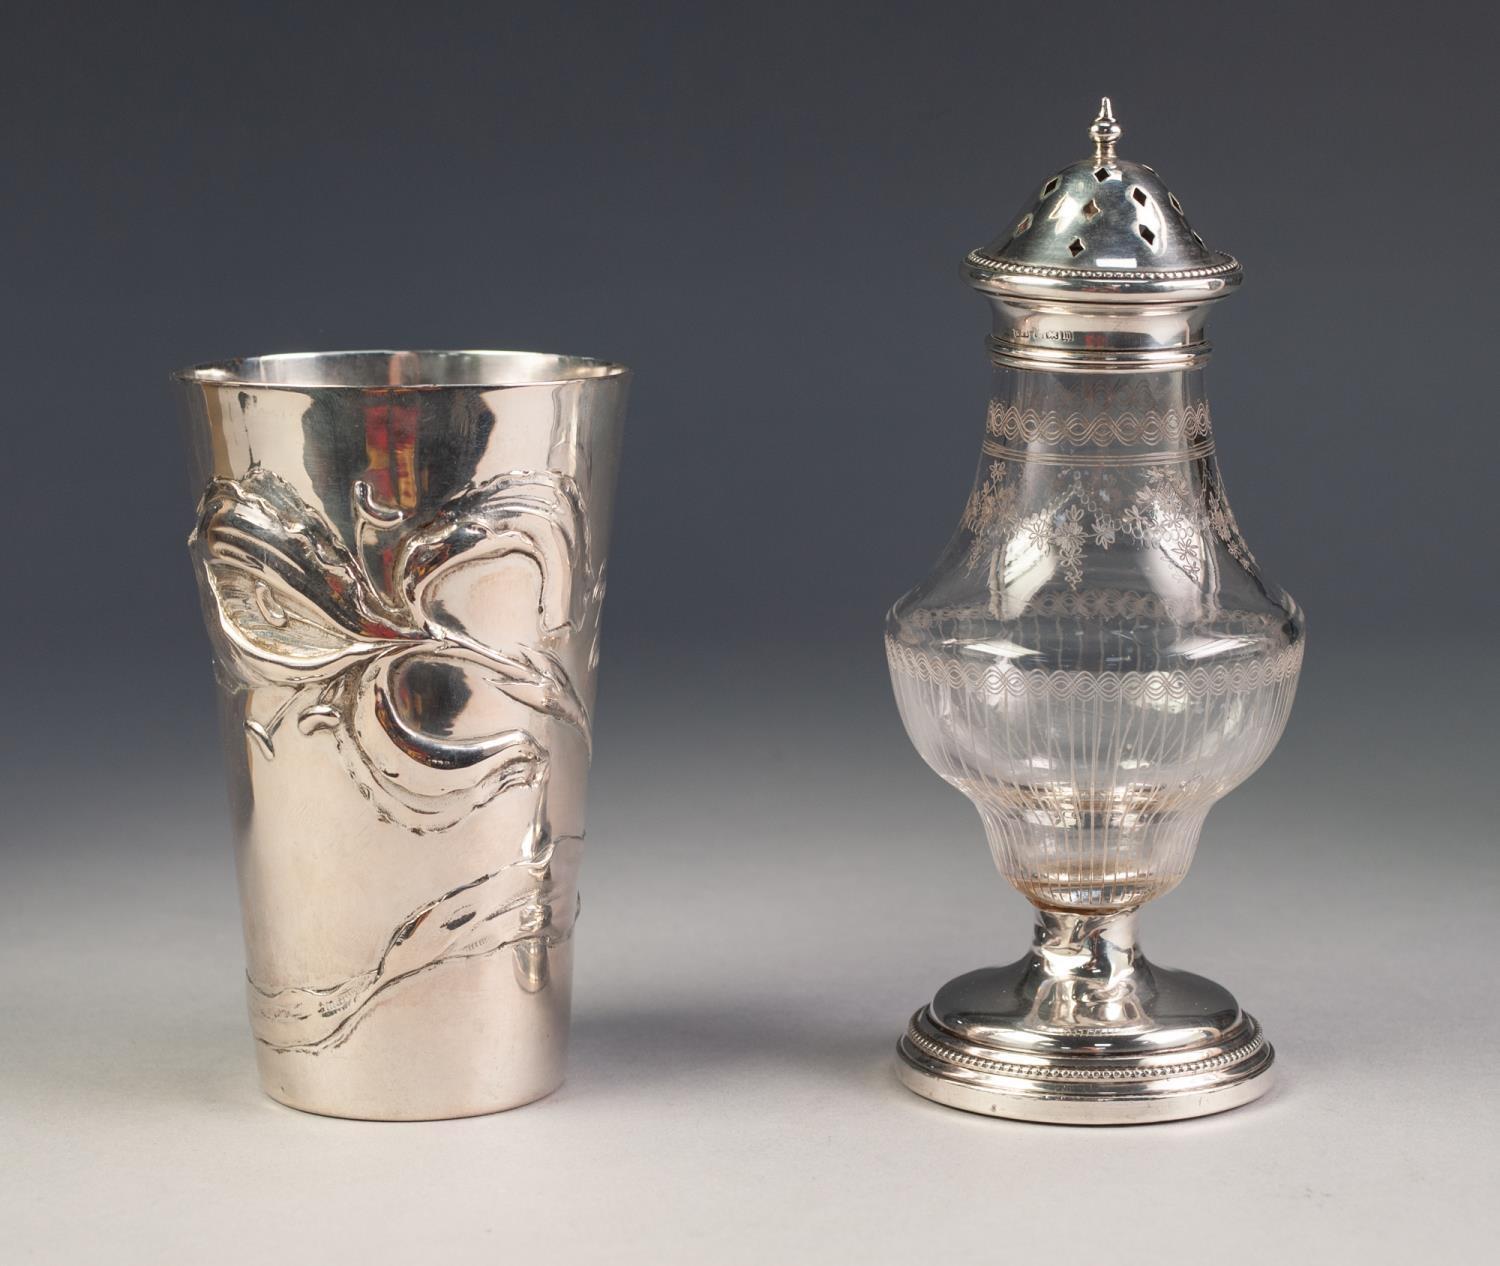 LATE 19th CENTURY BELGIAN 800 STANDARD SILVER TAPERED CYLINDRICAL BEAKER, cast in bas relief with